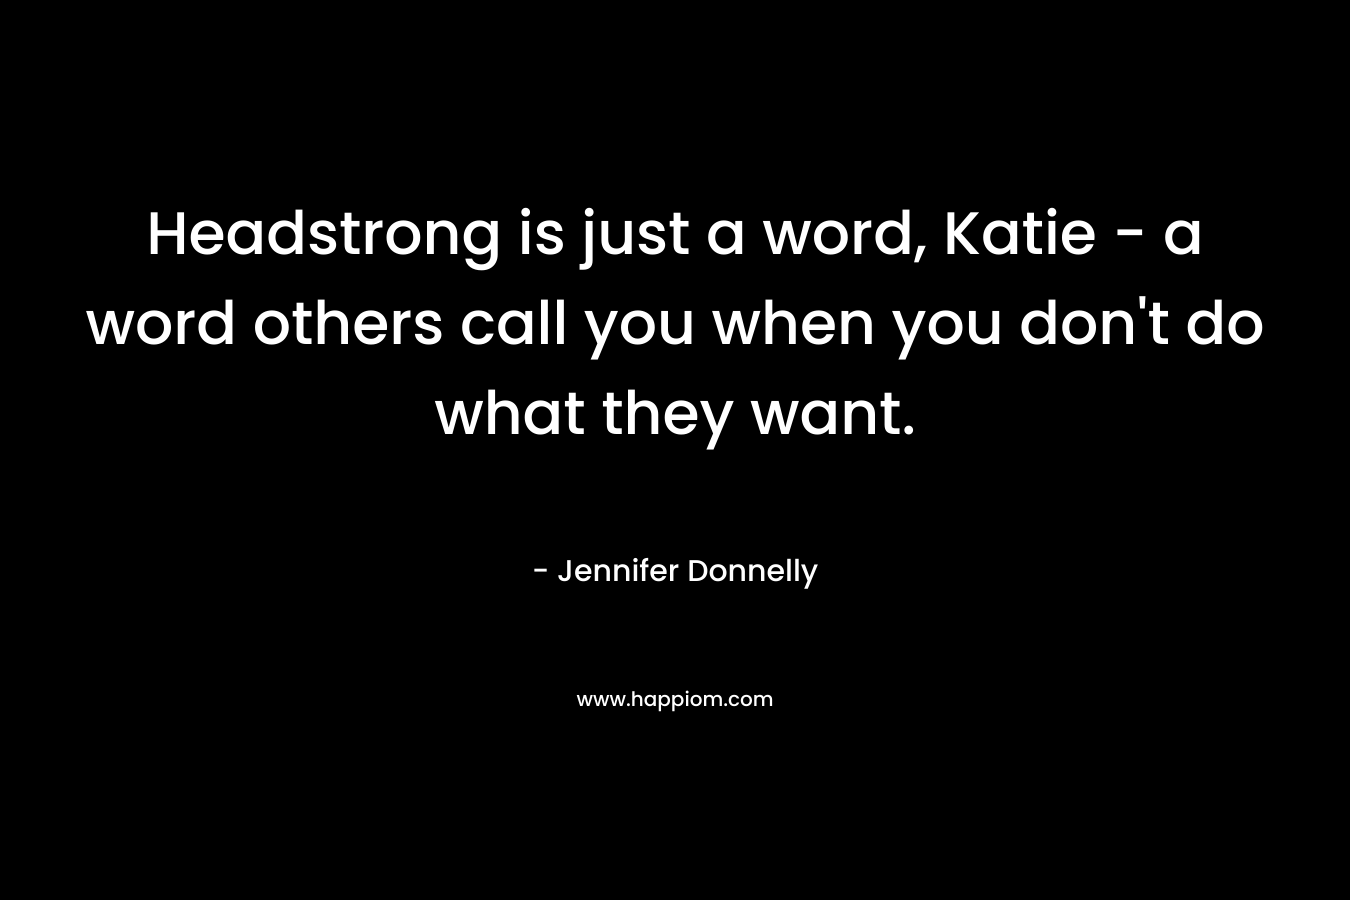 Headstrong is just a word, Katie - a word others call you when you don't do what they want.